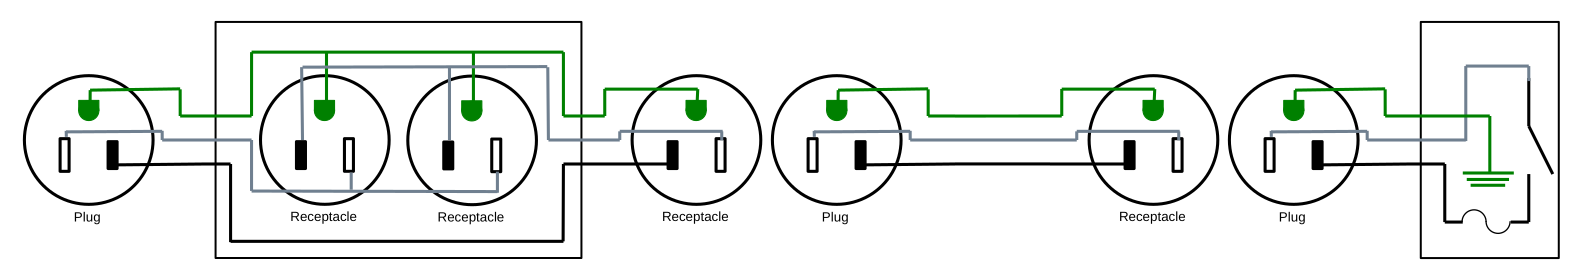 wiring-diagram-single-switch-extensible.png